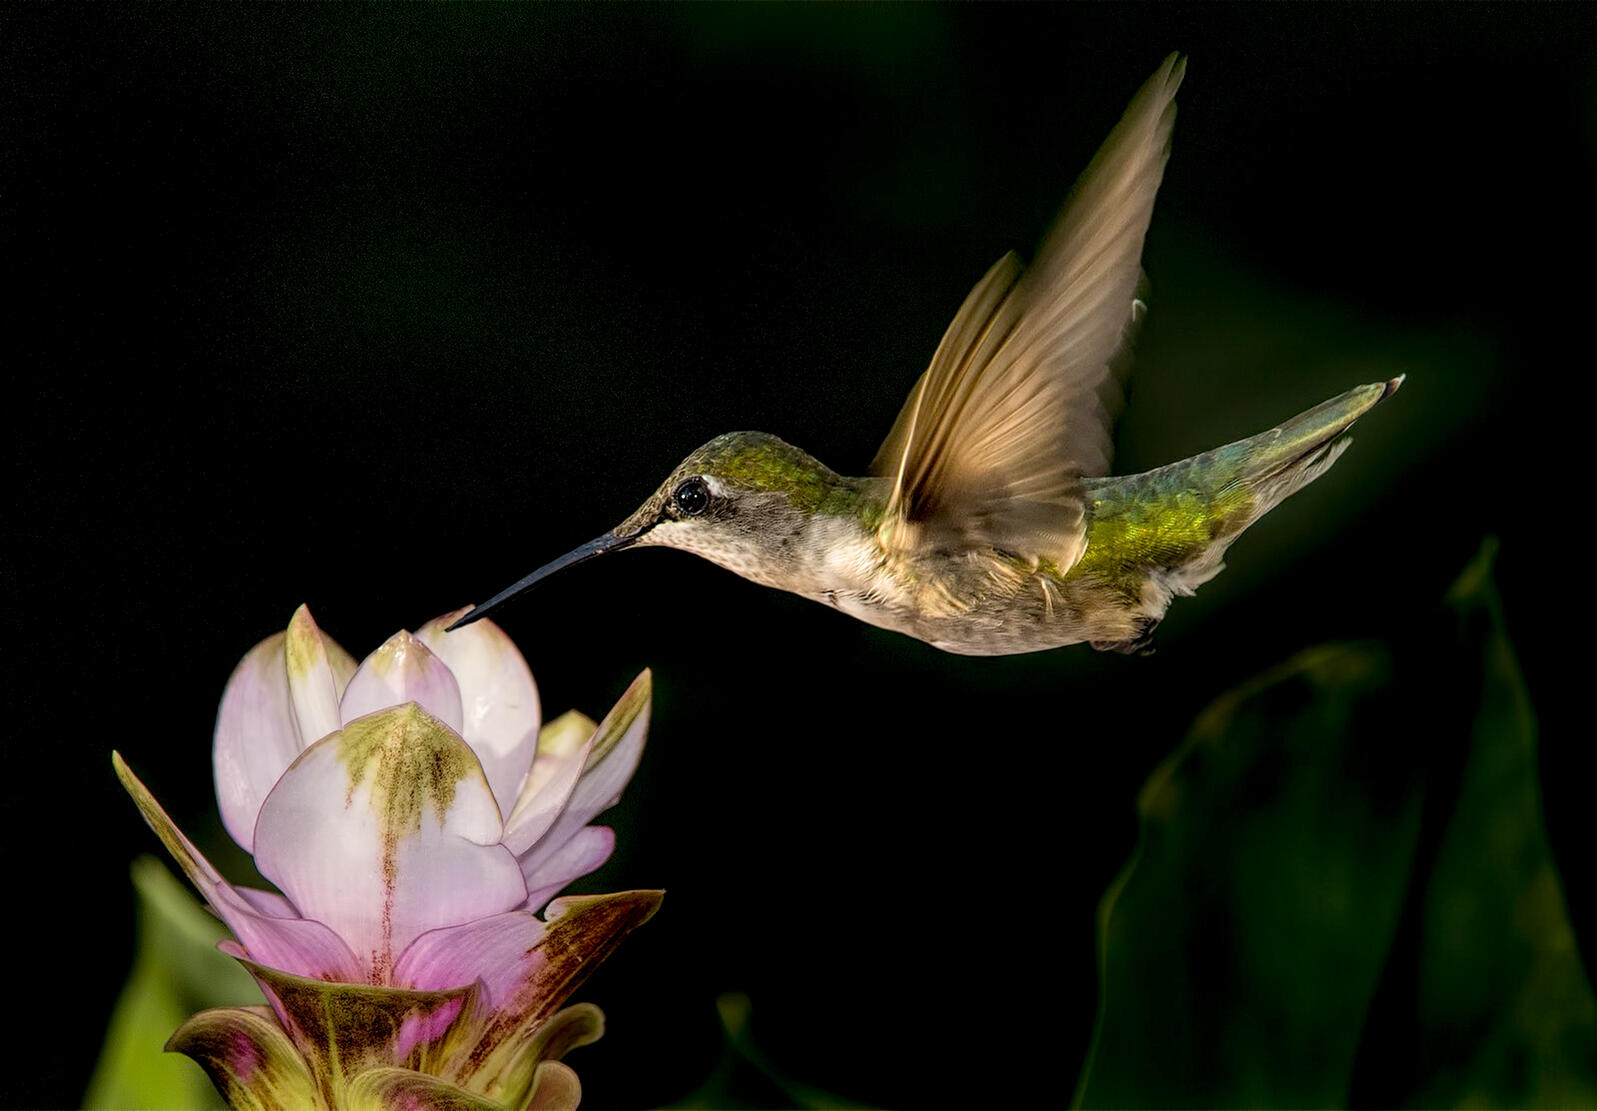 Ruby-throated Hummingbird hovering over a flower